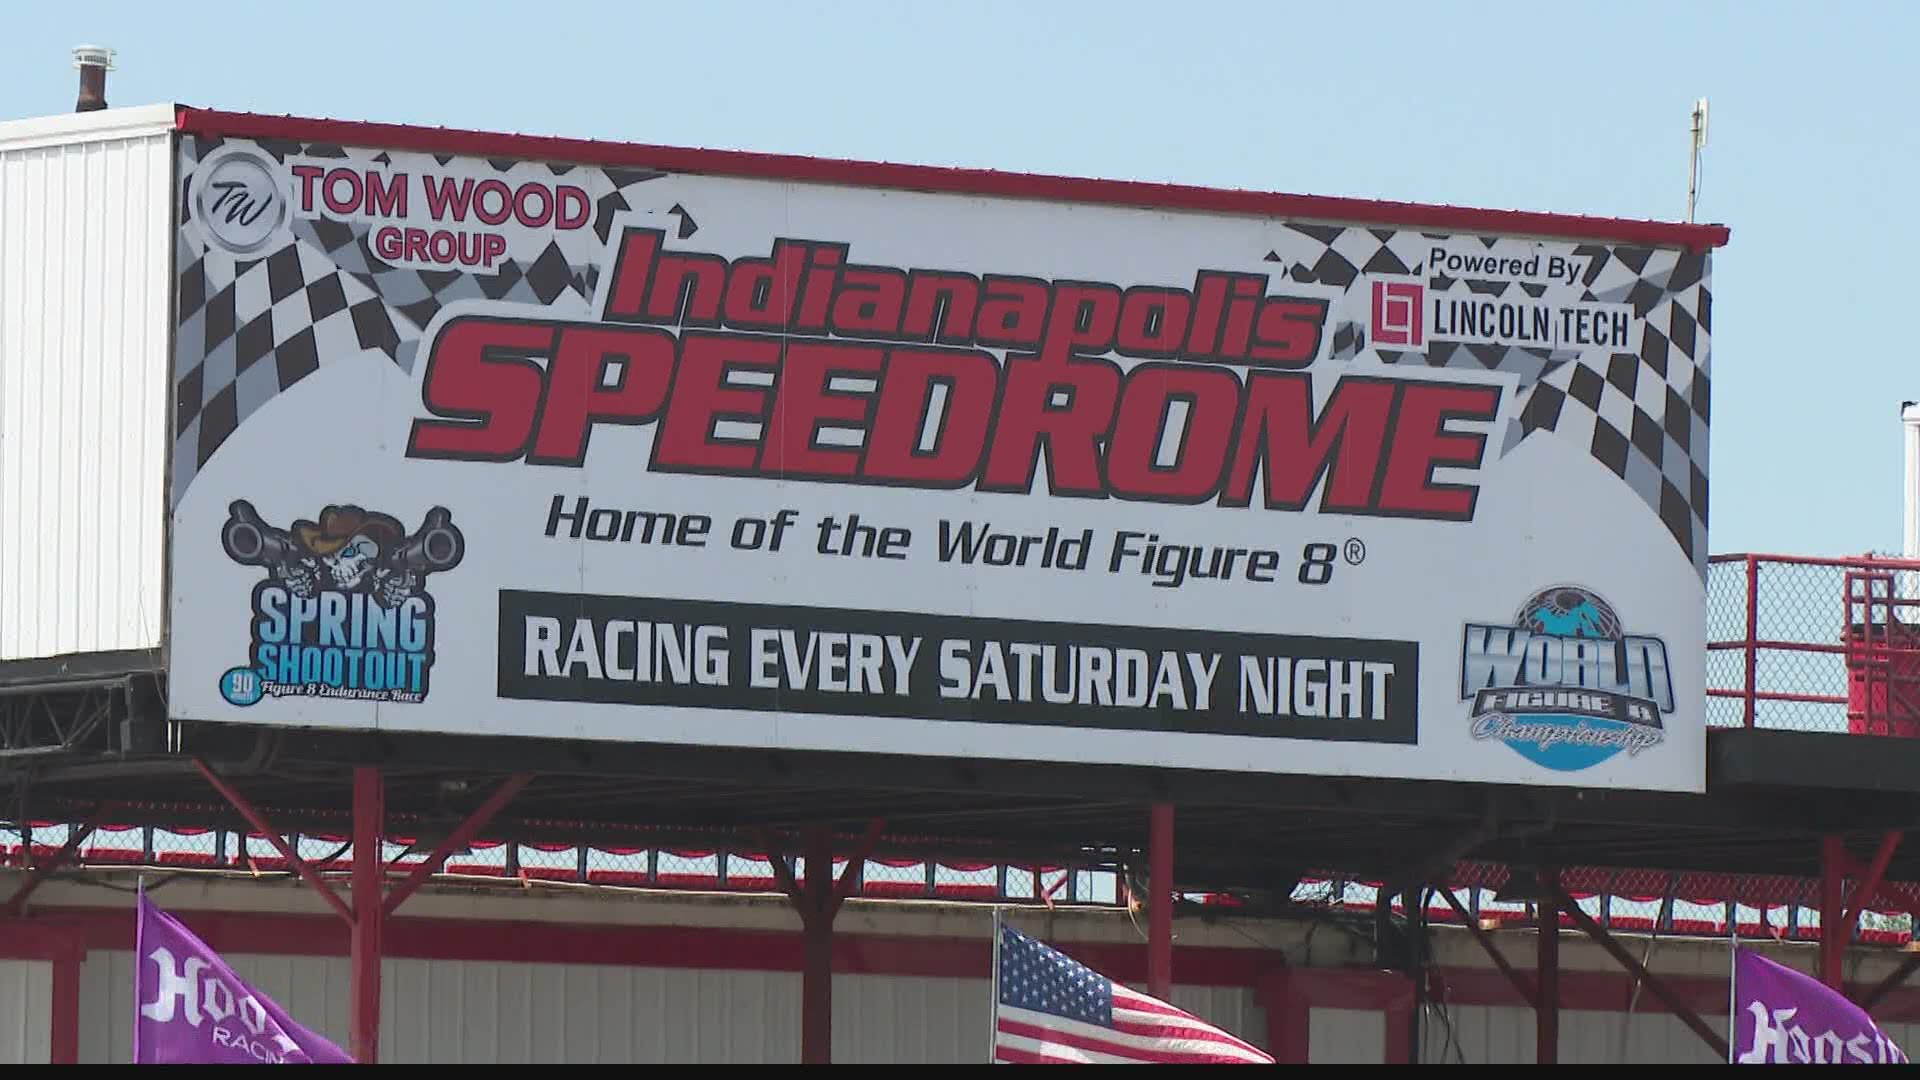 The Marion County Health Department is issuing a public health order violations for the Indianapolis Speedrome after a packed crowd at a weekend event.